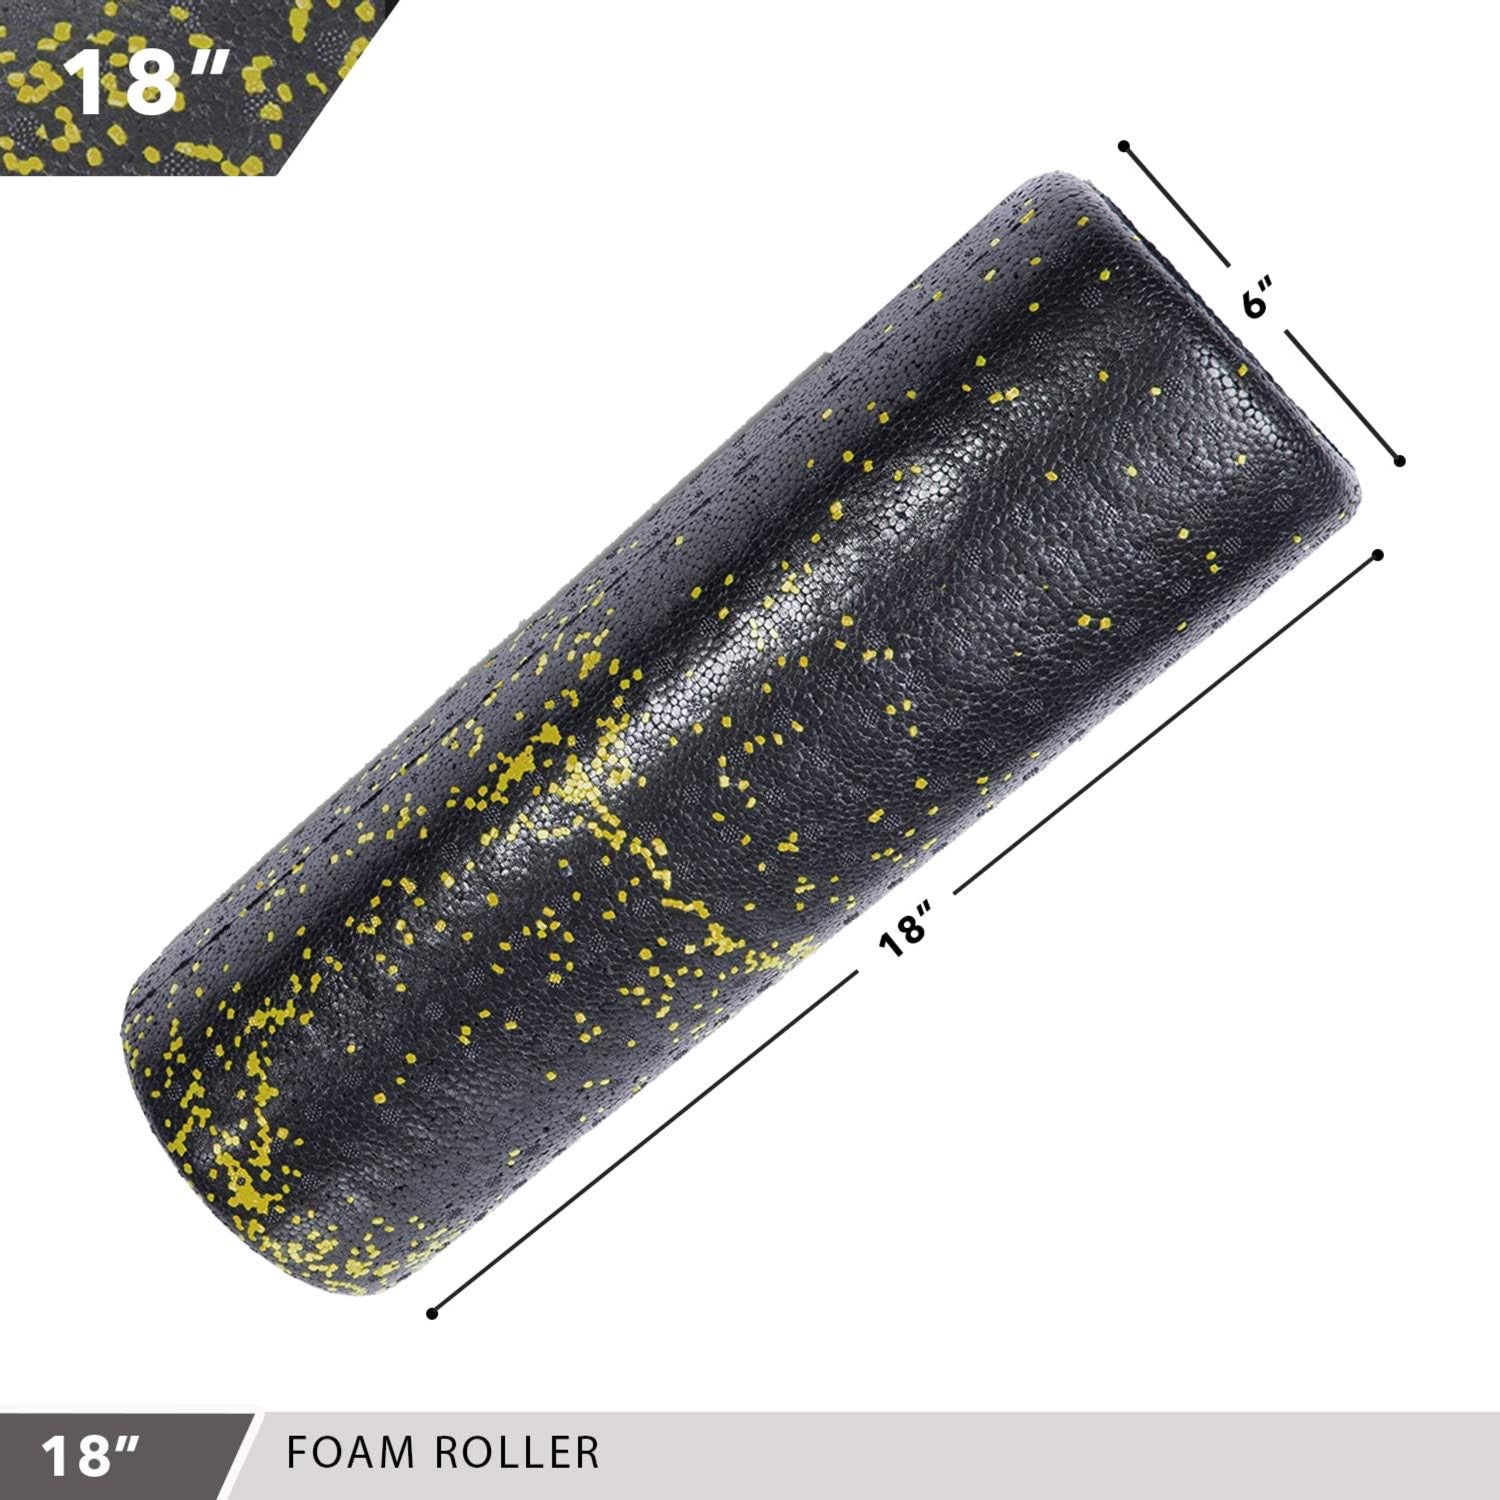 High-Density Foam Roller 18" Speckled Yellow Day 1 Fitness